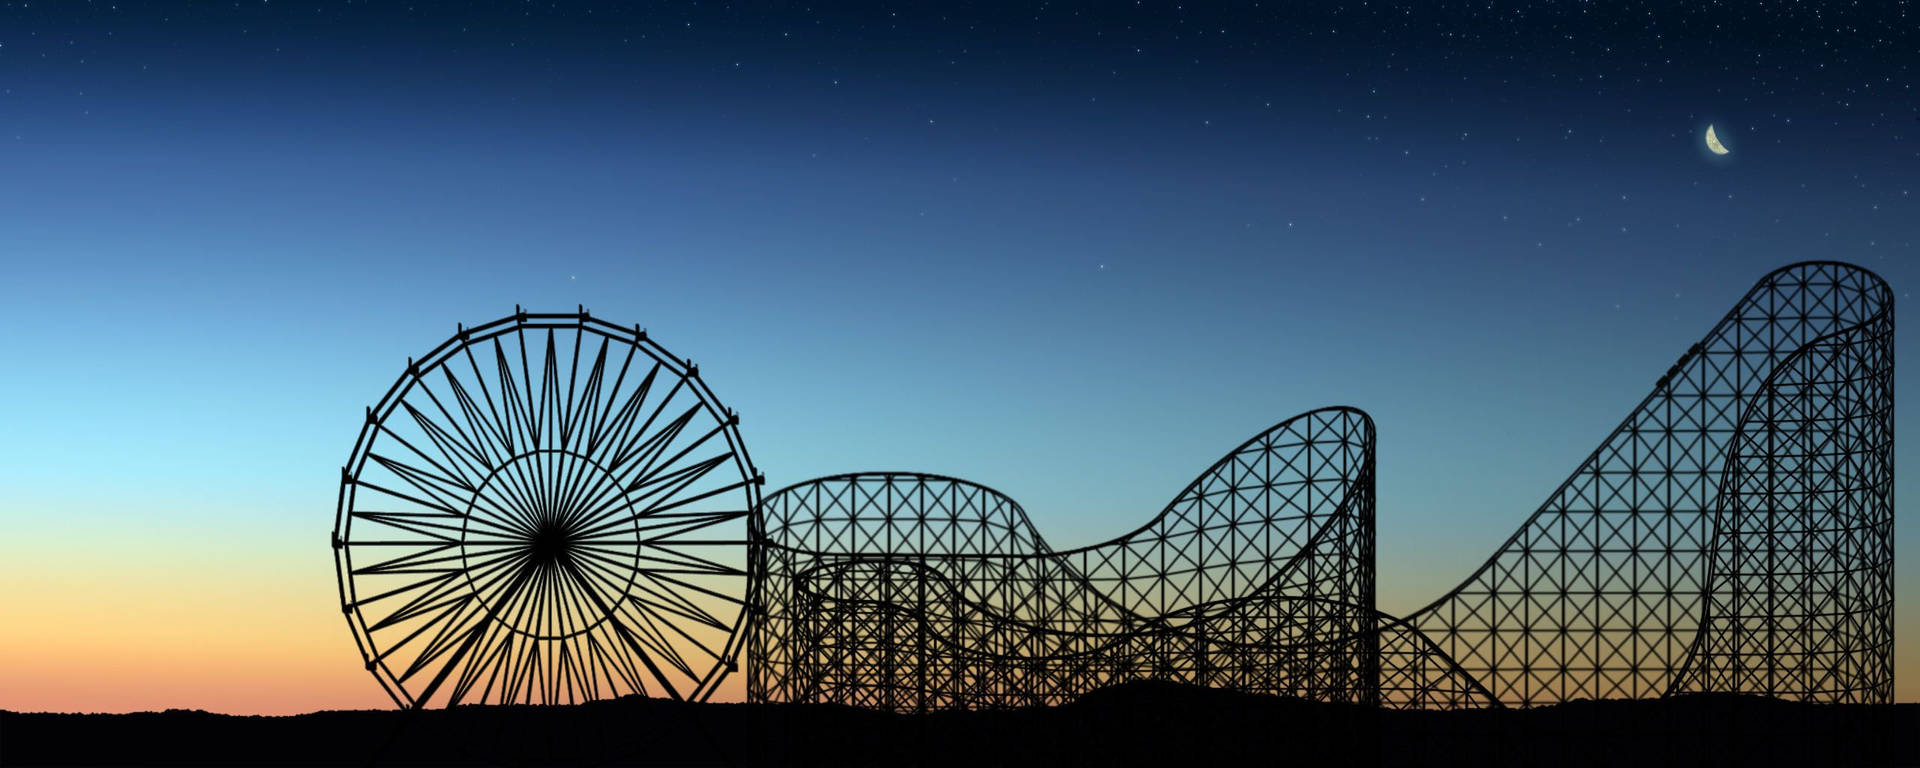 Roller Coaster And Ferris Wheel Silhouettes Background